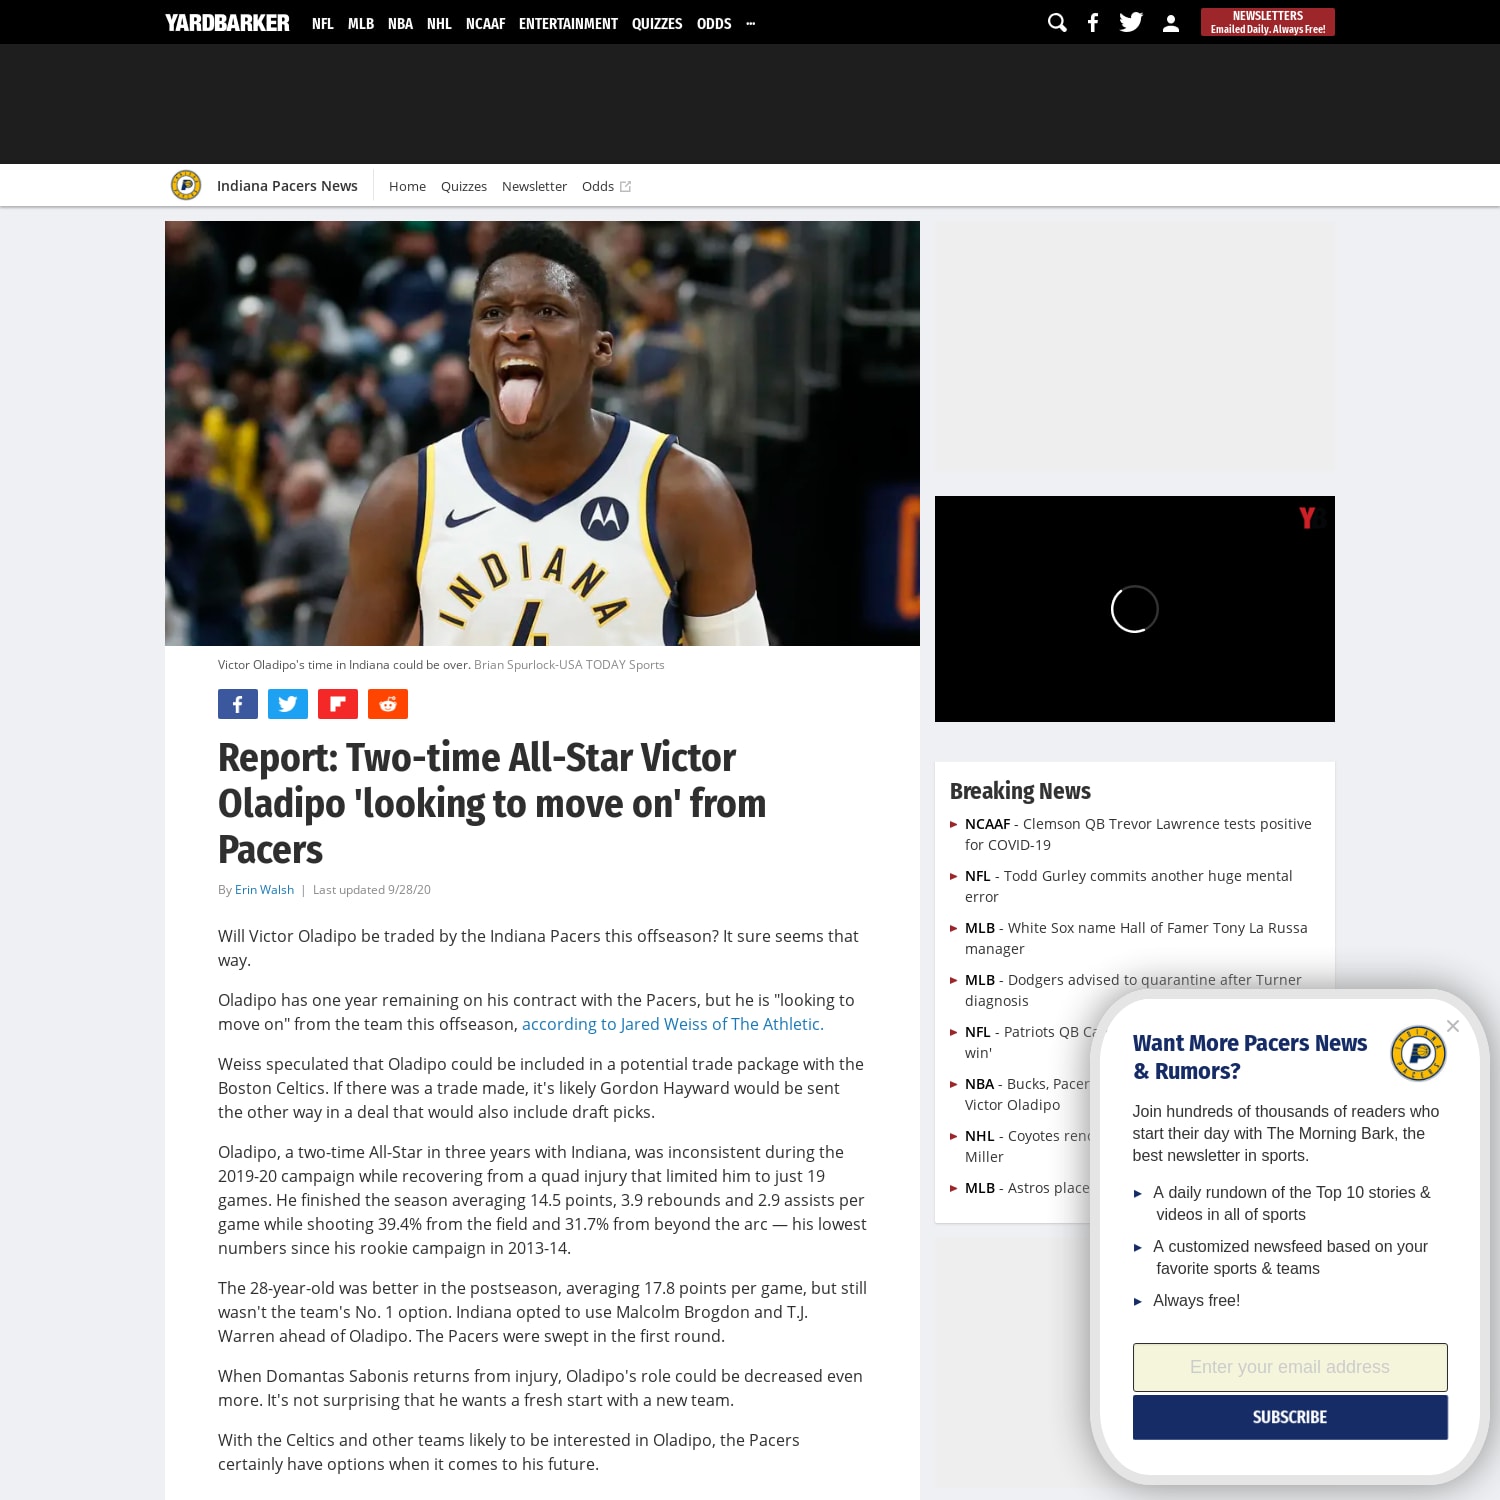 Report: Two-time All-Star Victor Oladipo 'looking to move on' from Pacers